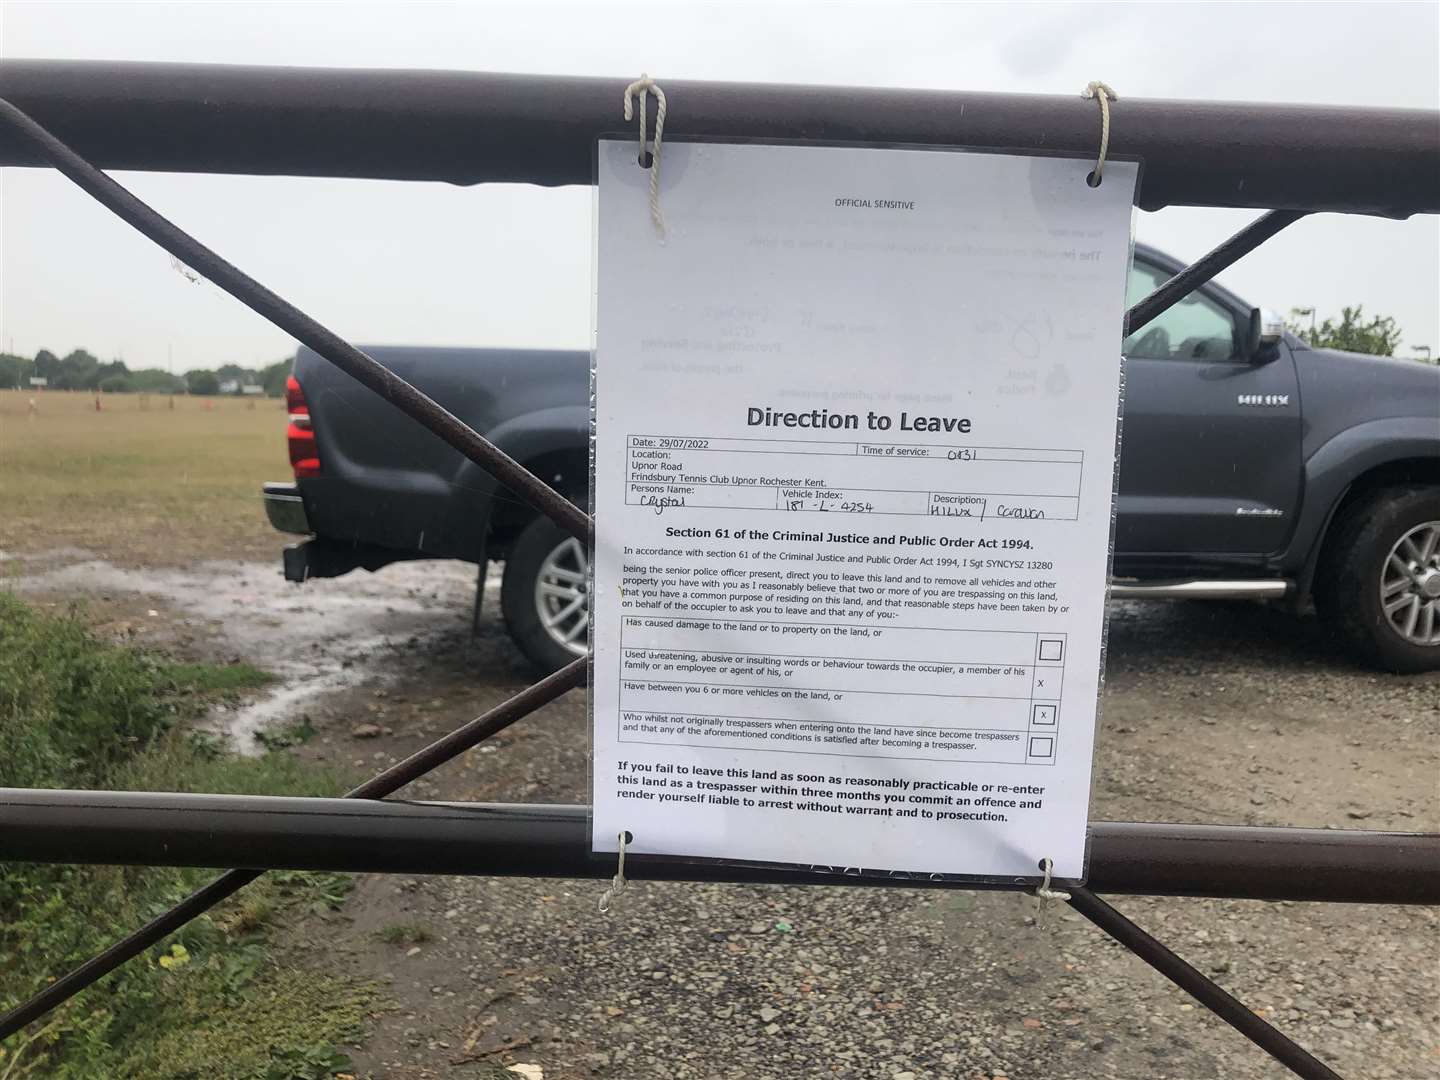 There are multiple direction of notices up around the field from last month